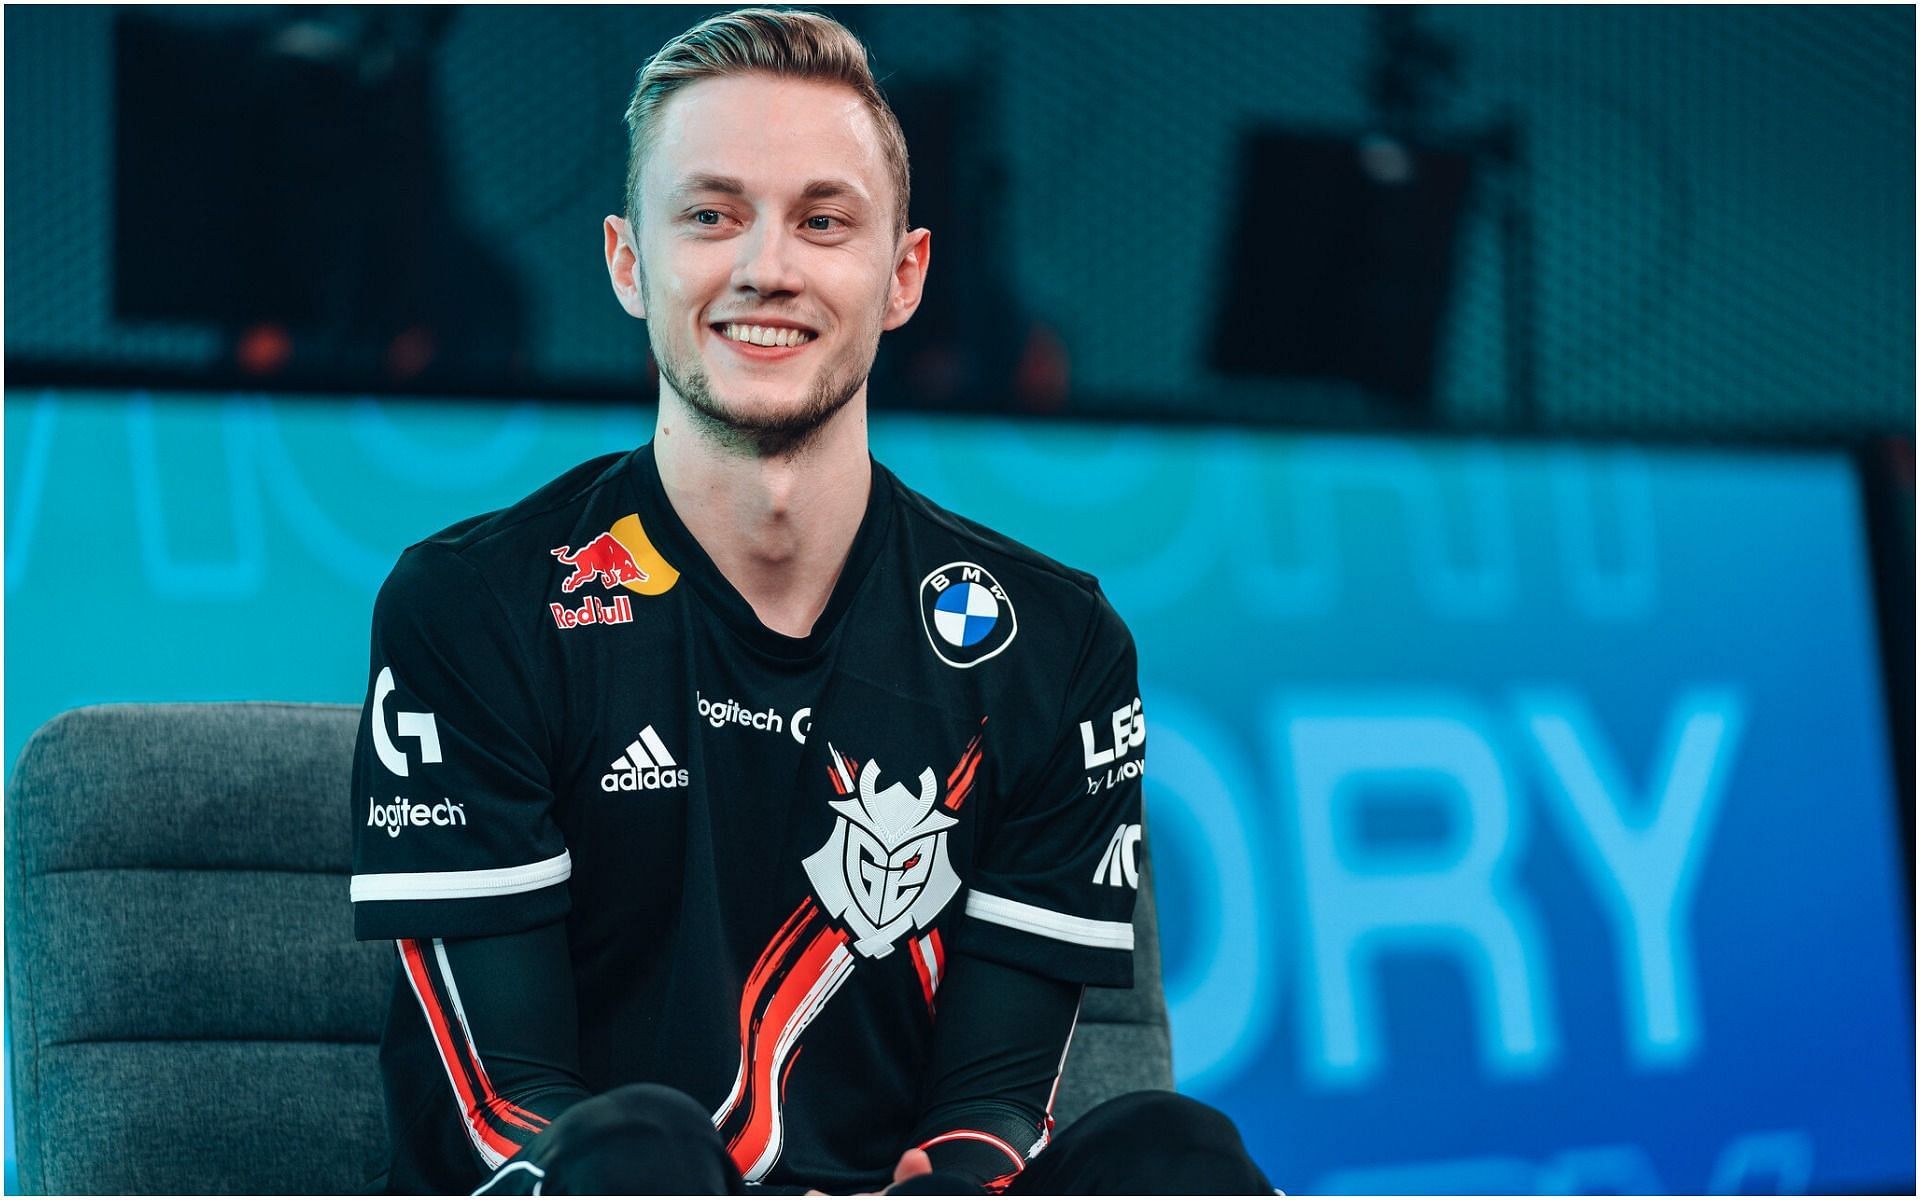 Rekkles seems to be losing his demand when compared to modern-day ADCs like Hans Sama (Image via Riot Games)